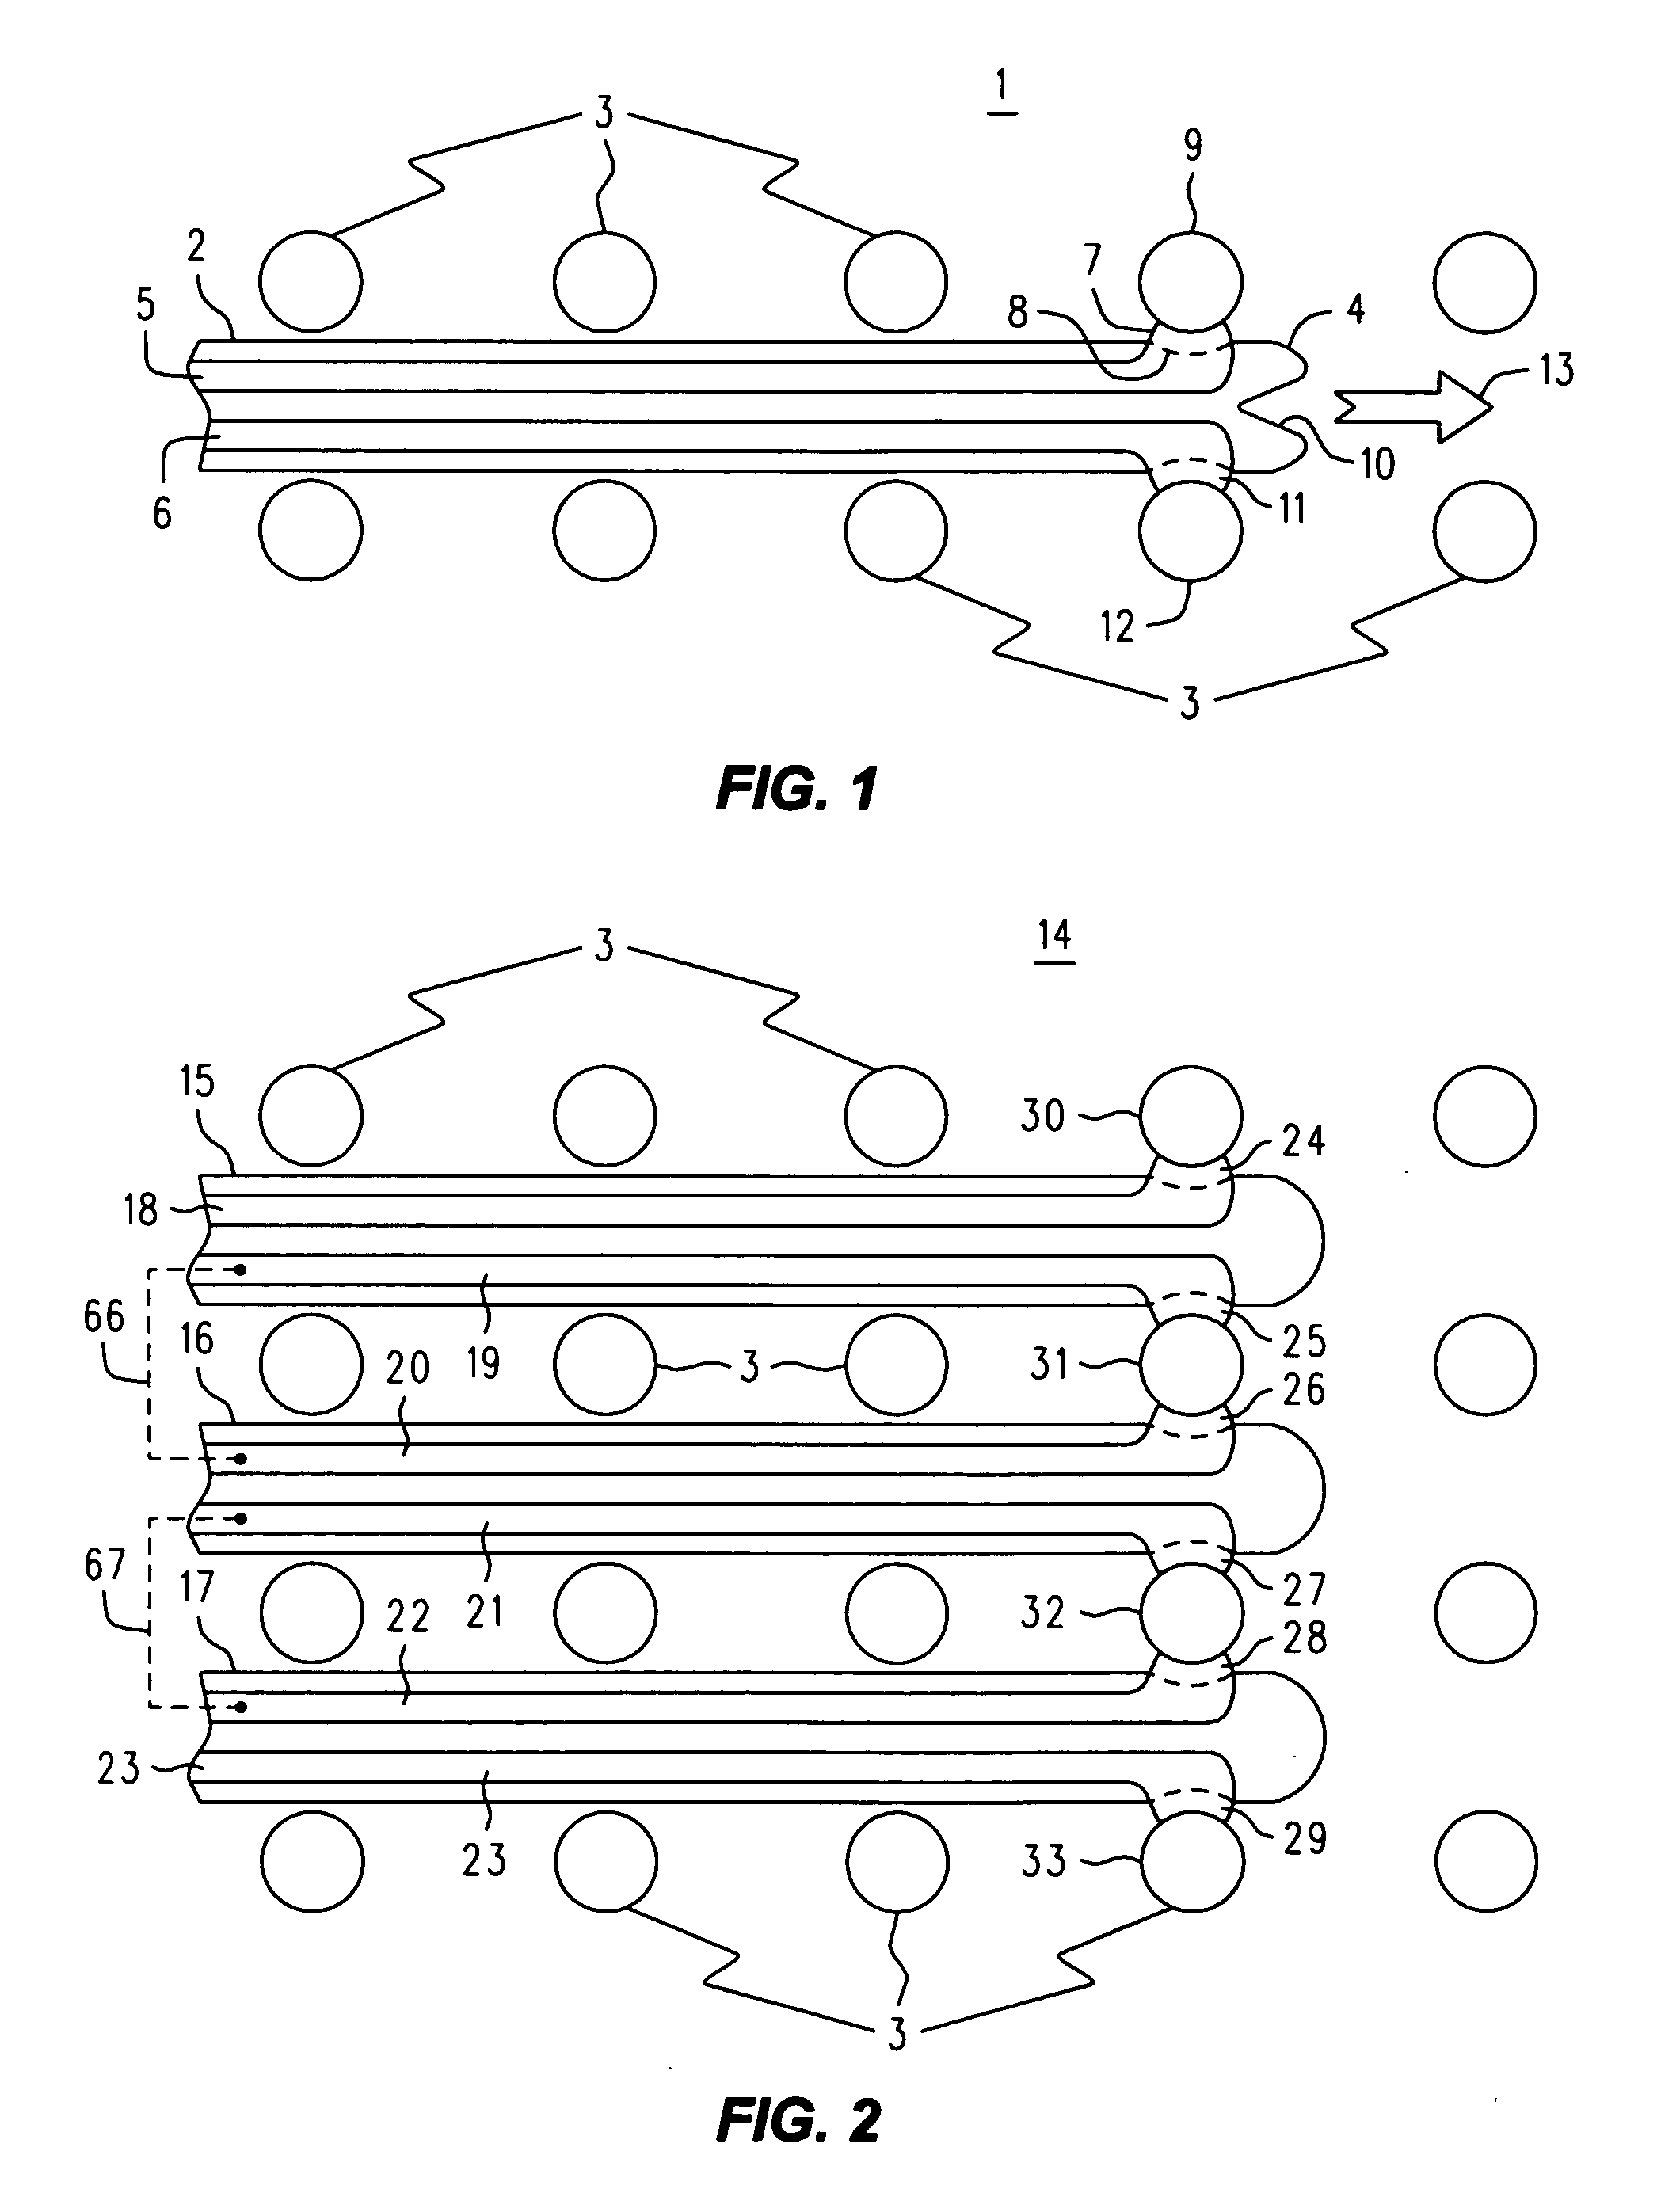 Method and apparatus for probing at arbitrary locations within an inaccessible array of leads the solder balls or pins actually connecting a VLSI IC package to a substrate or socket